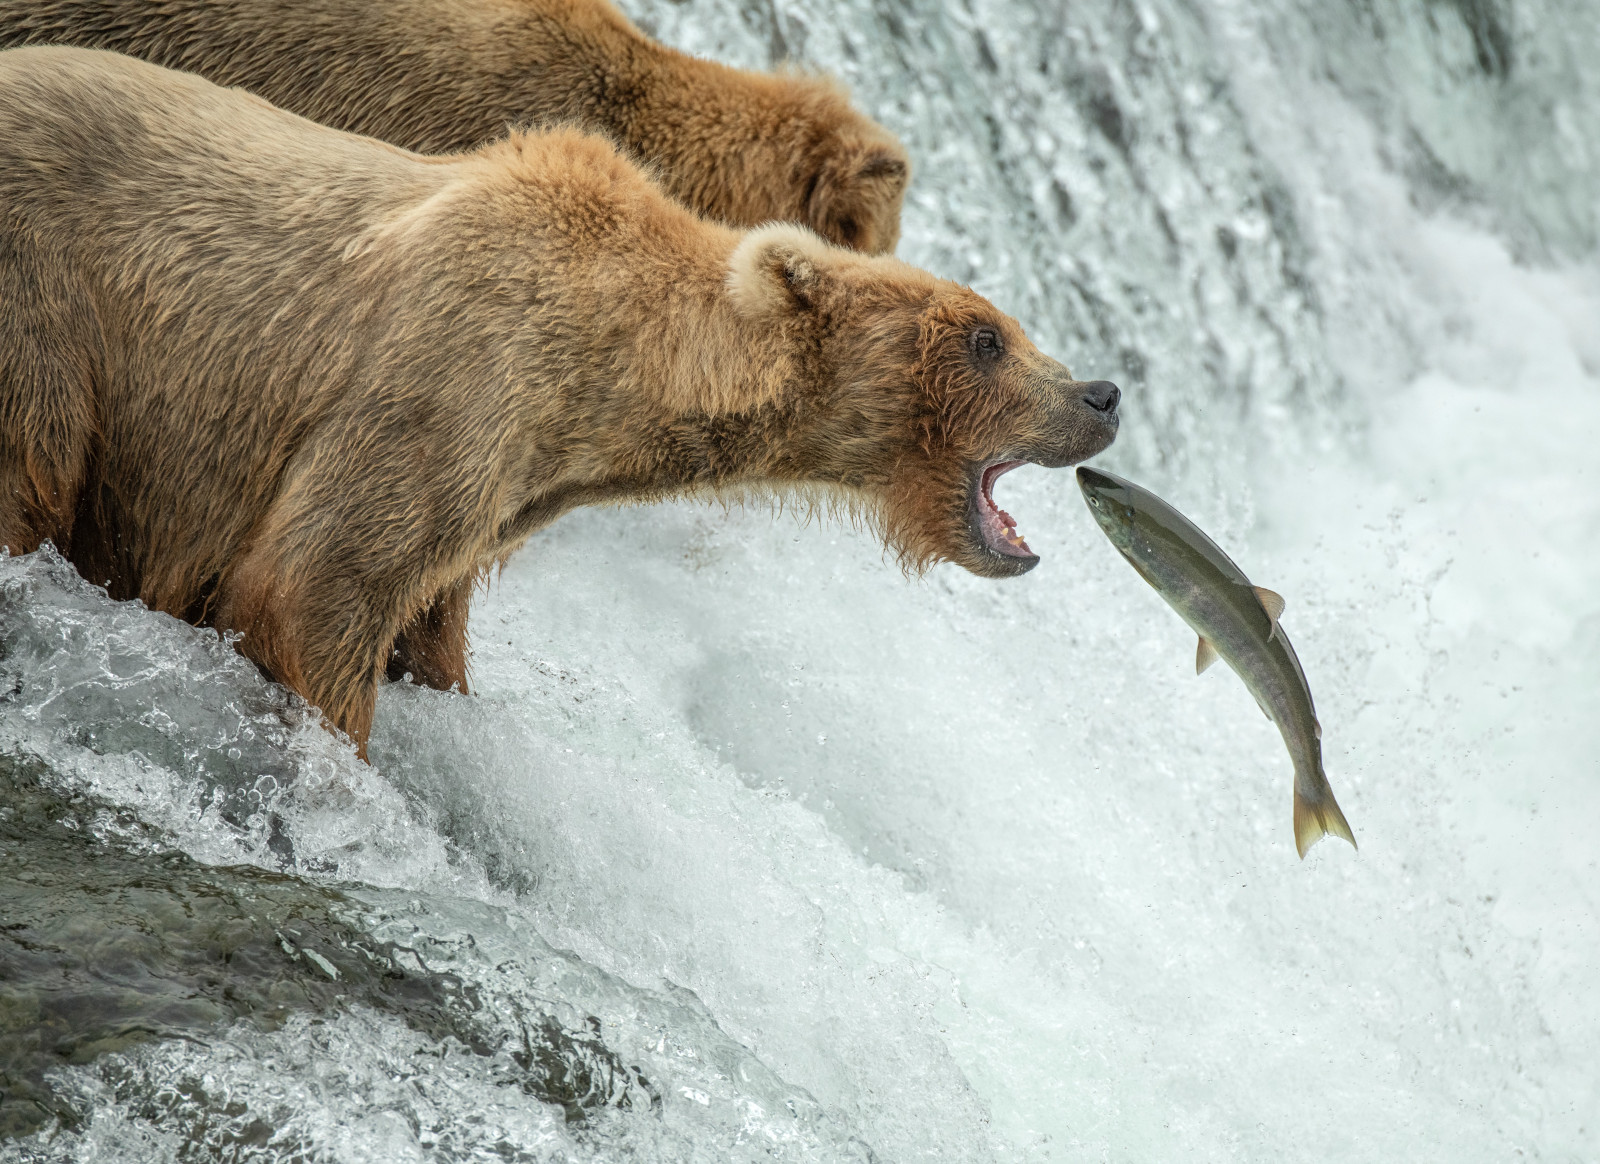 Fish jumping into bear's mouth